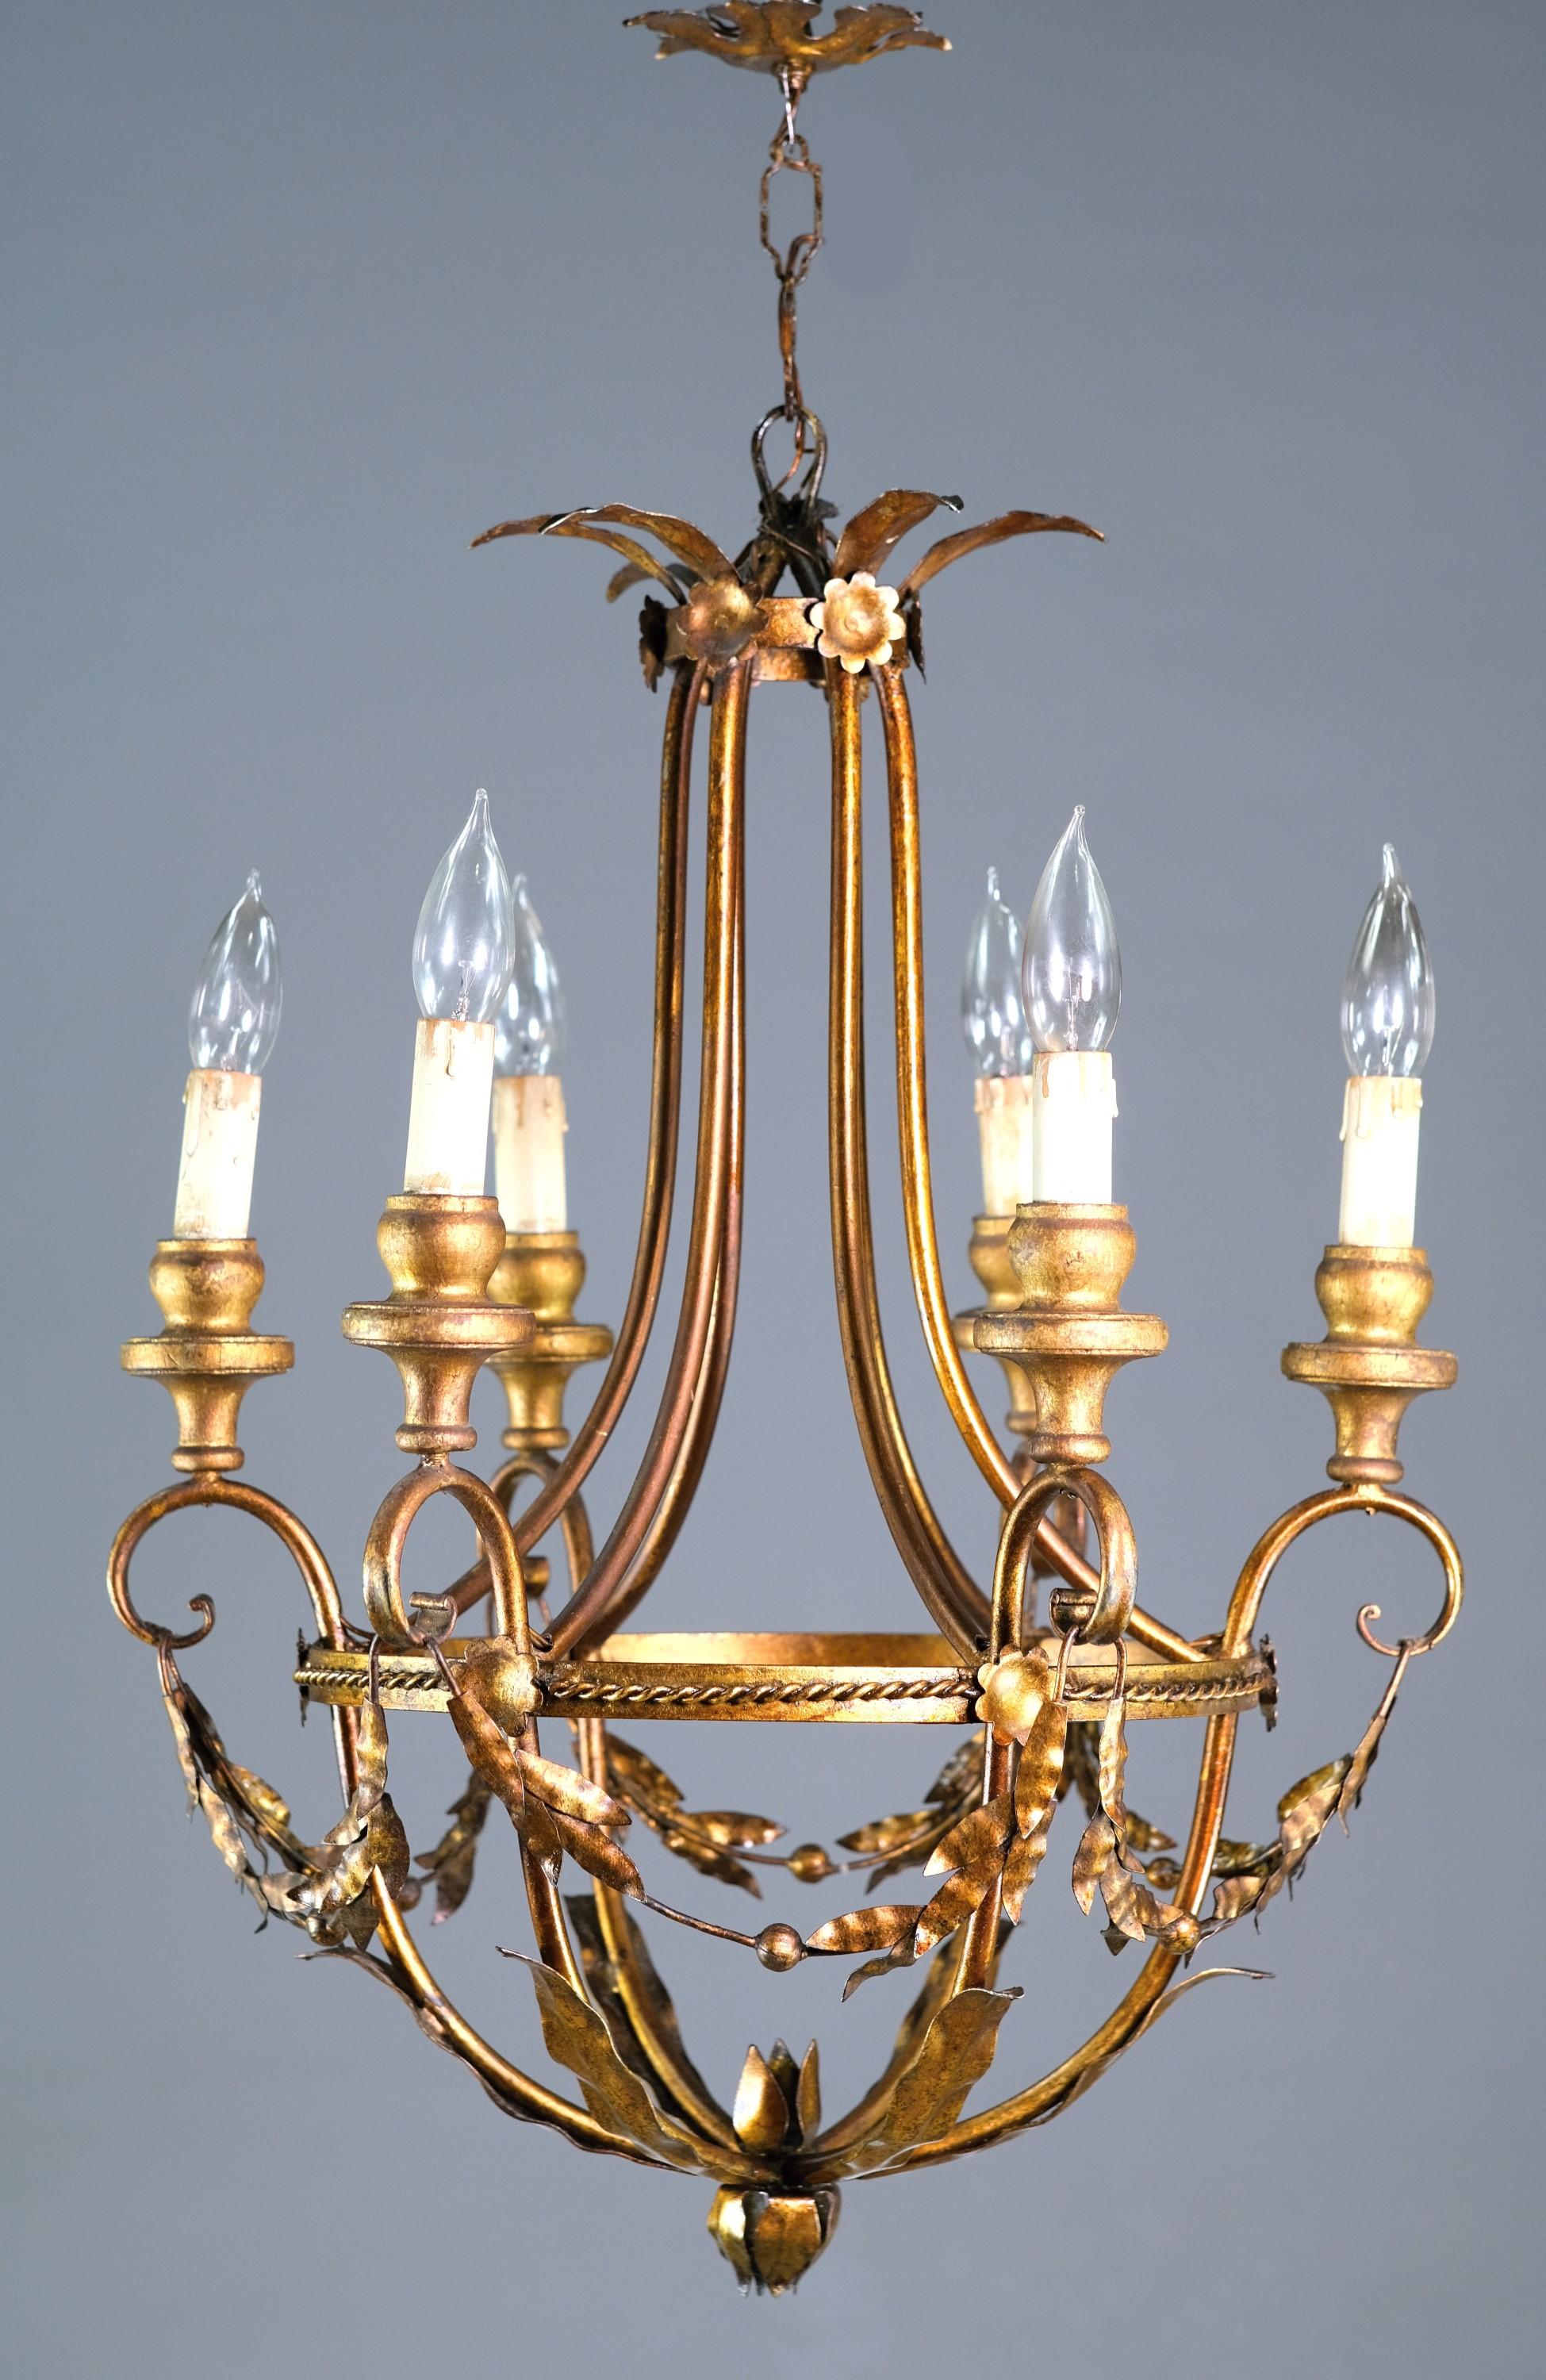 Restored Gold Gilt Wood Chandelier from Italy 6 Arms Crystals 4